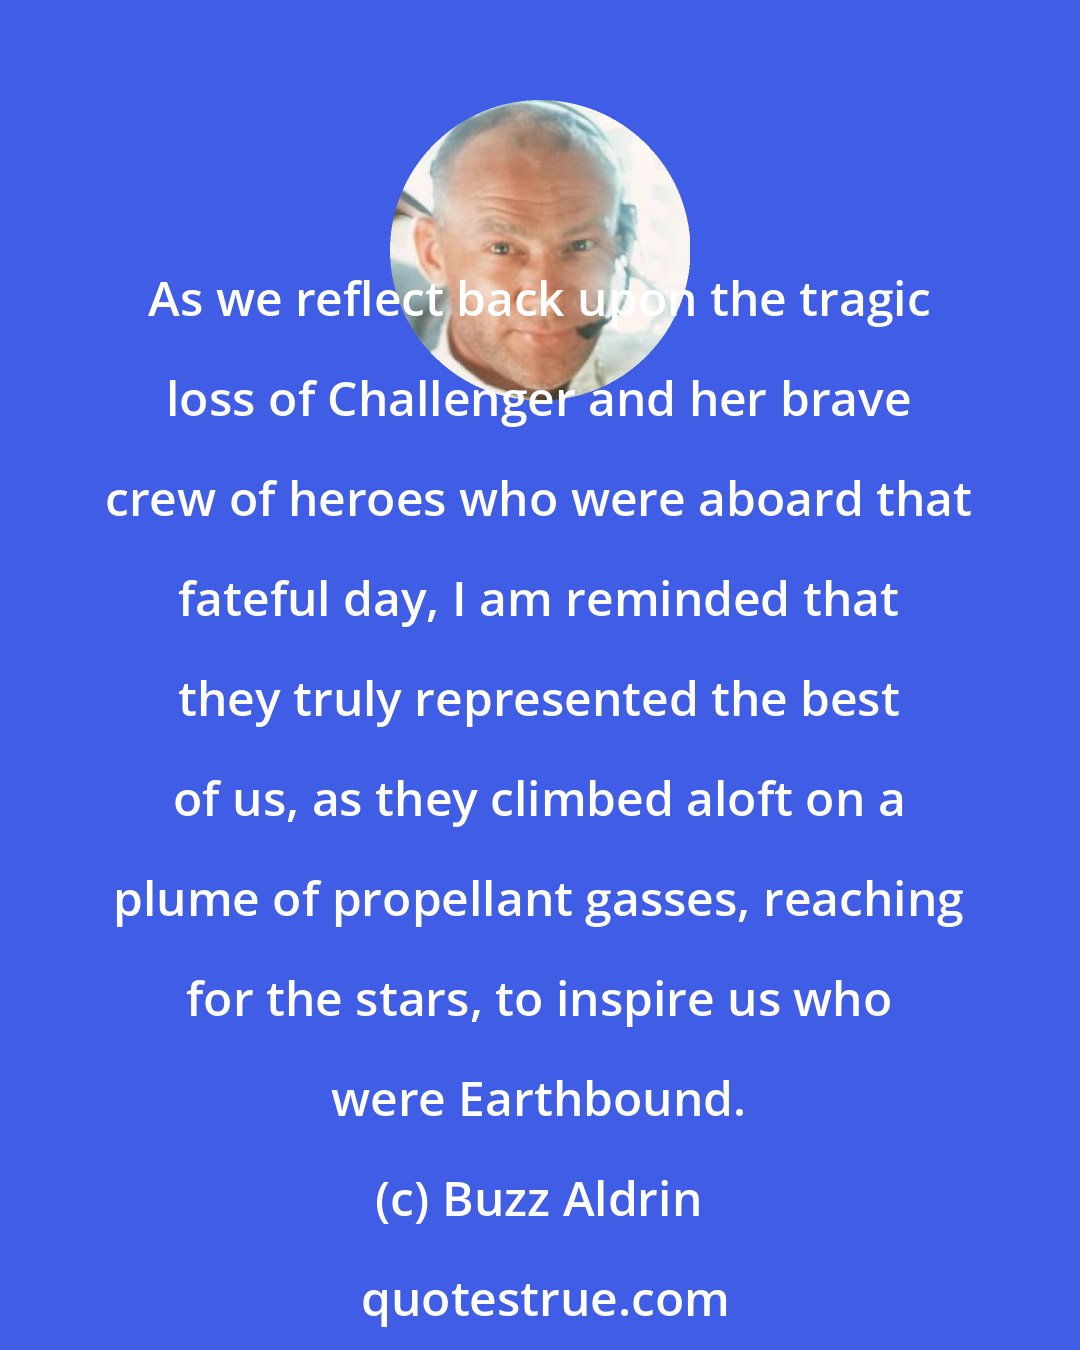 Buzz Aldrin: As we reflect back upon the tragic loss of Challenger and her brave crew of heroes who were aboard that fateful day, I am reminded that they truly represented the best of us, as they climbed aloft on a plume of propellant gasses, reaching for the stars, to inspire us who were Earthbound.